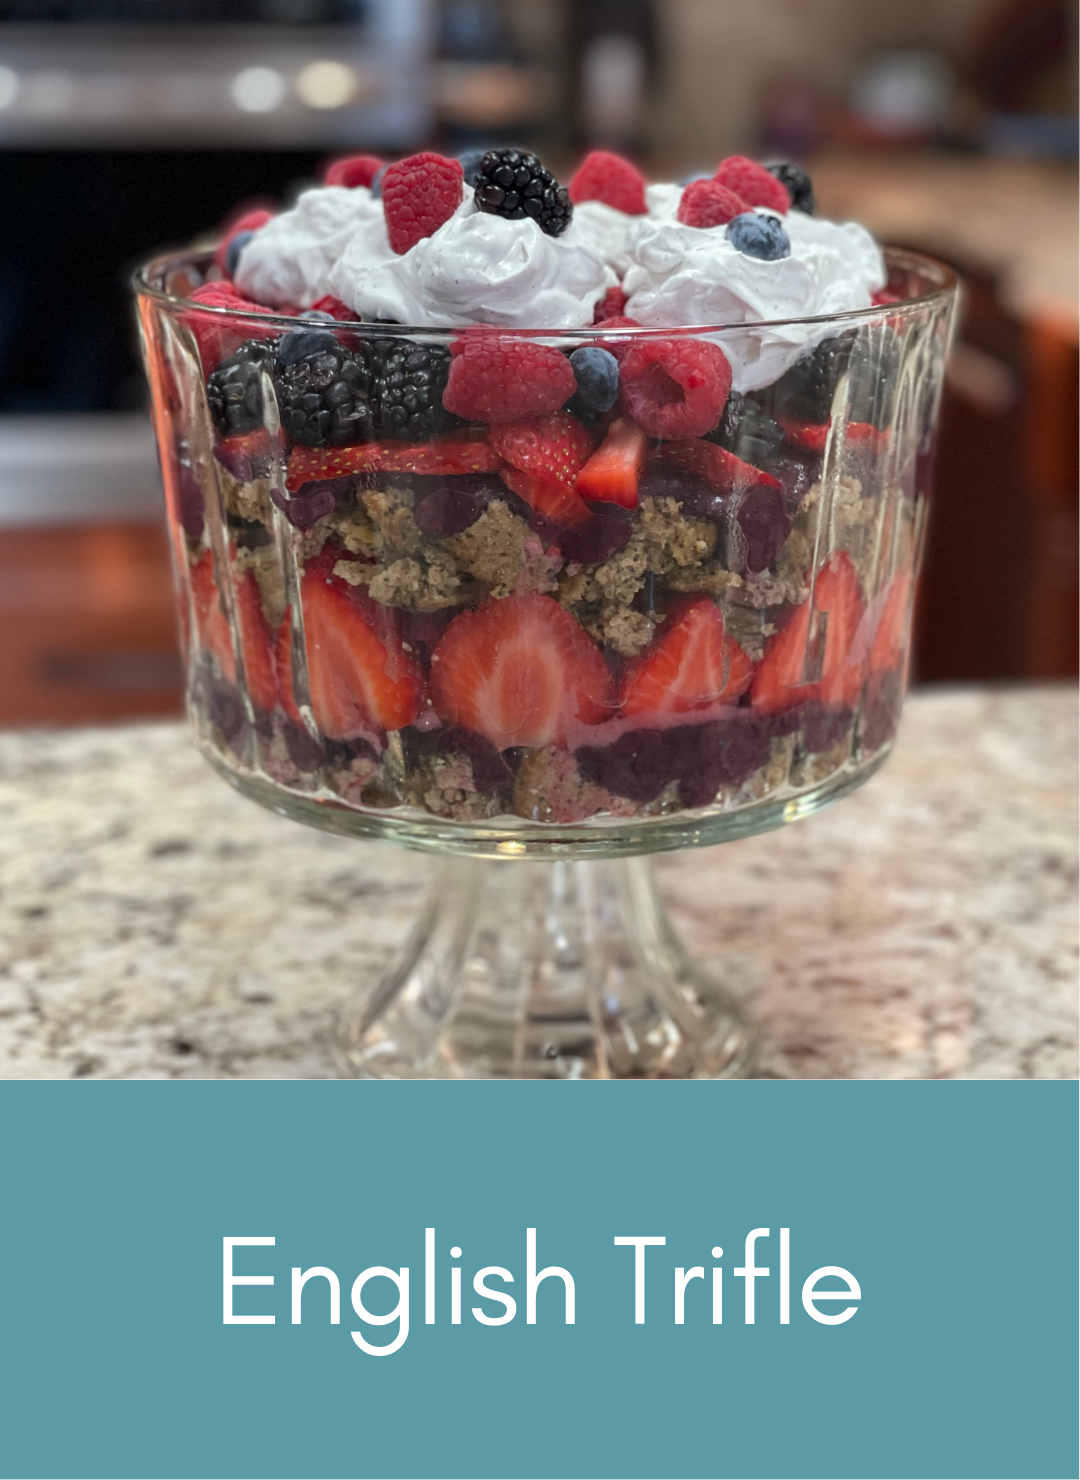 English style trifle layered with strawberries blueberries blackberries and whole wheat lemon muffins Picture with link to recipe